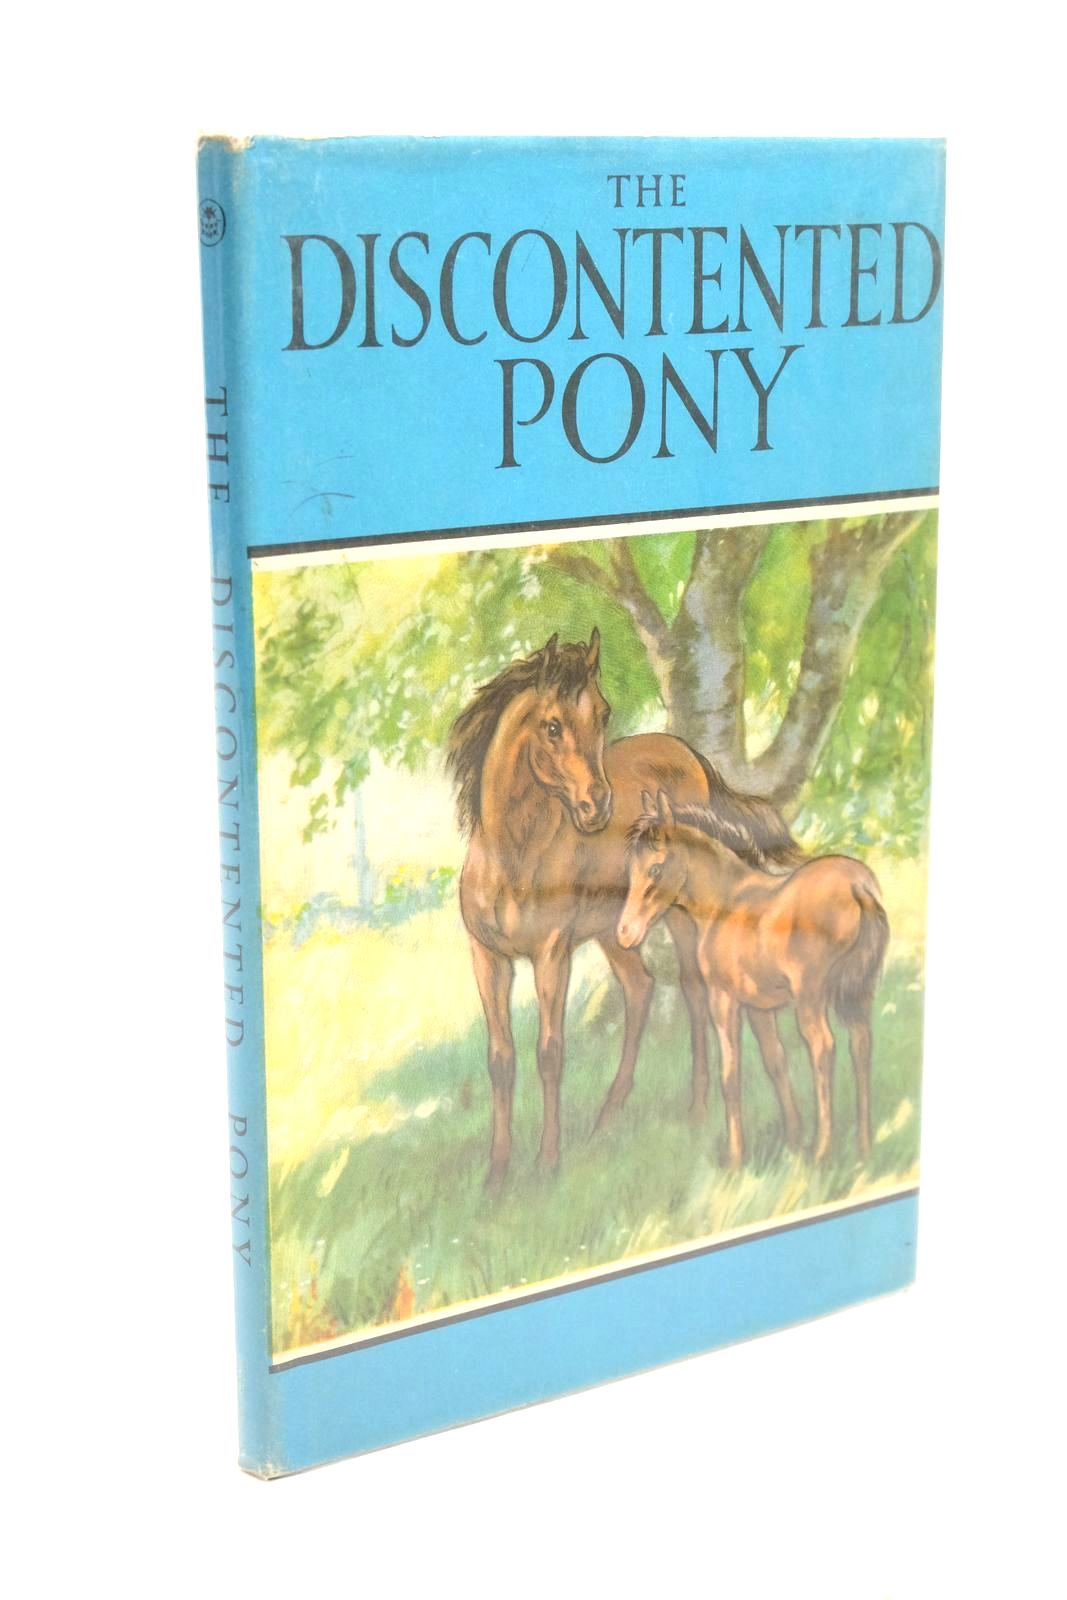 Photo of THE DISCONTENTED PONY written by Barr, Noel illustrated by Hickling, P.B. published by Wills & Hepworth Ltd. (STOCK CODE: 1322399)  for sale by Stella & Rose's Books